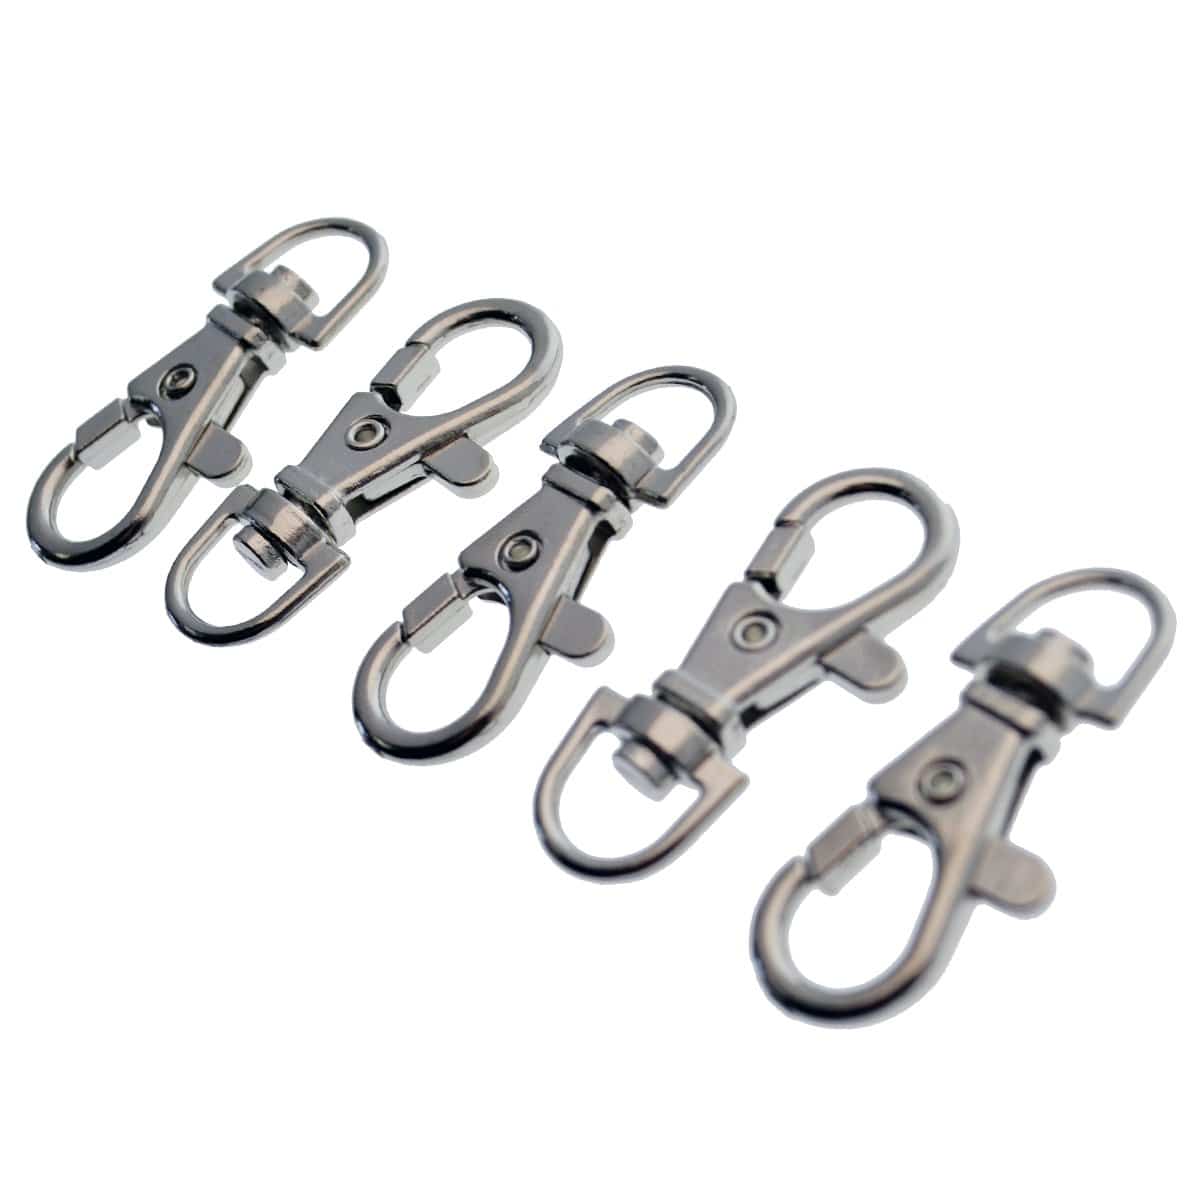 50 Pack Metal Swivel Clasps Lobster Claw Clasp Lanyard Snap Hook 1 5/8” x  1” (Wide 3/4” D Ring) with 50 Key Rings - Jewelry Findings Or Sewing  Projects … 